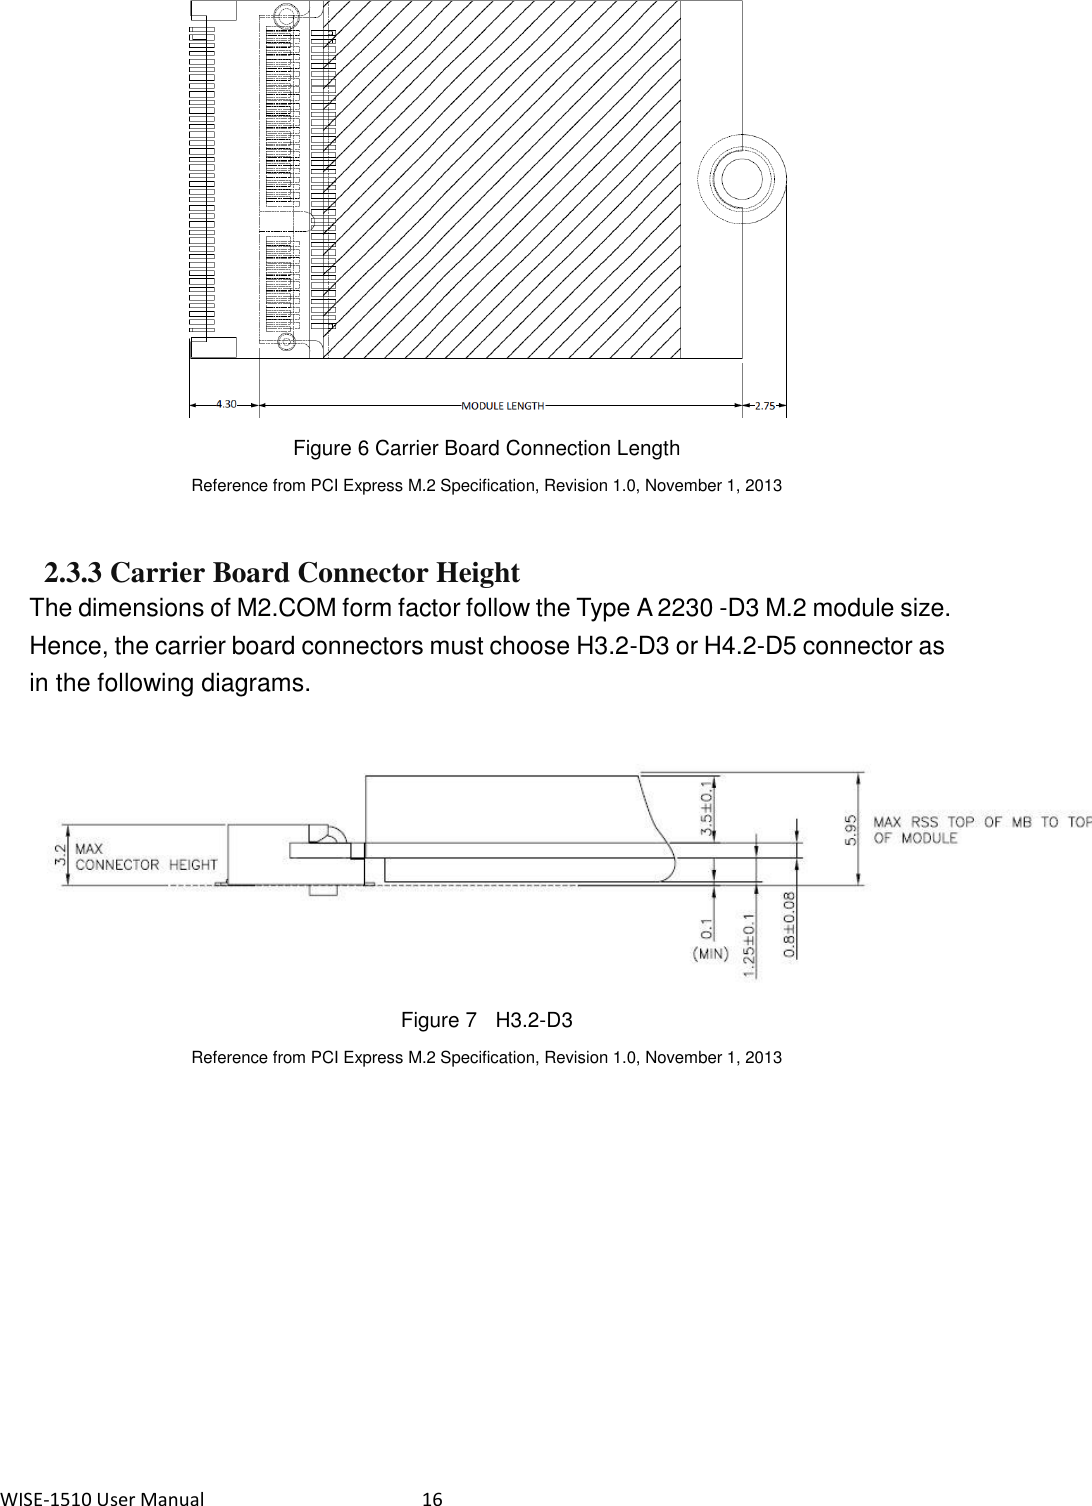 WISE-1510 User Manual  16  Figure 6 Carrier Board Connection Length Reference from PCI Express M.2 Specification, Revision 1.0, November 1, 2013  2.3.3 Carrier Board Connector Height The dimensions of M2.COM form factor follow the Type A 2230 -D3 M.2 module size. Hence, the carrier board connectors must choose H3.2-D3 or H4.2-D5 connector as in the following diagrams.   Figure 7  H3.2-D3 Reference from PCI Express M.2 Specification, Revision 1.0, November 1, 2013   